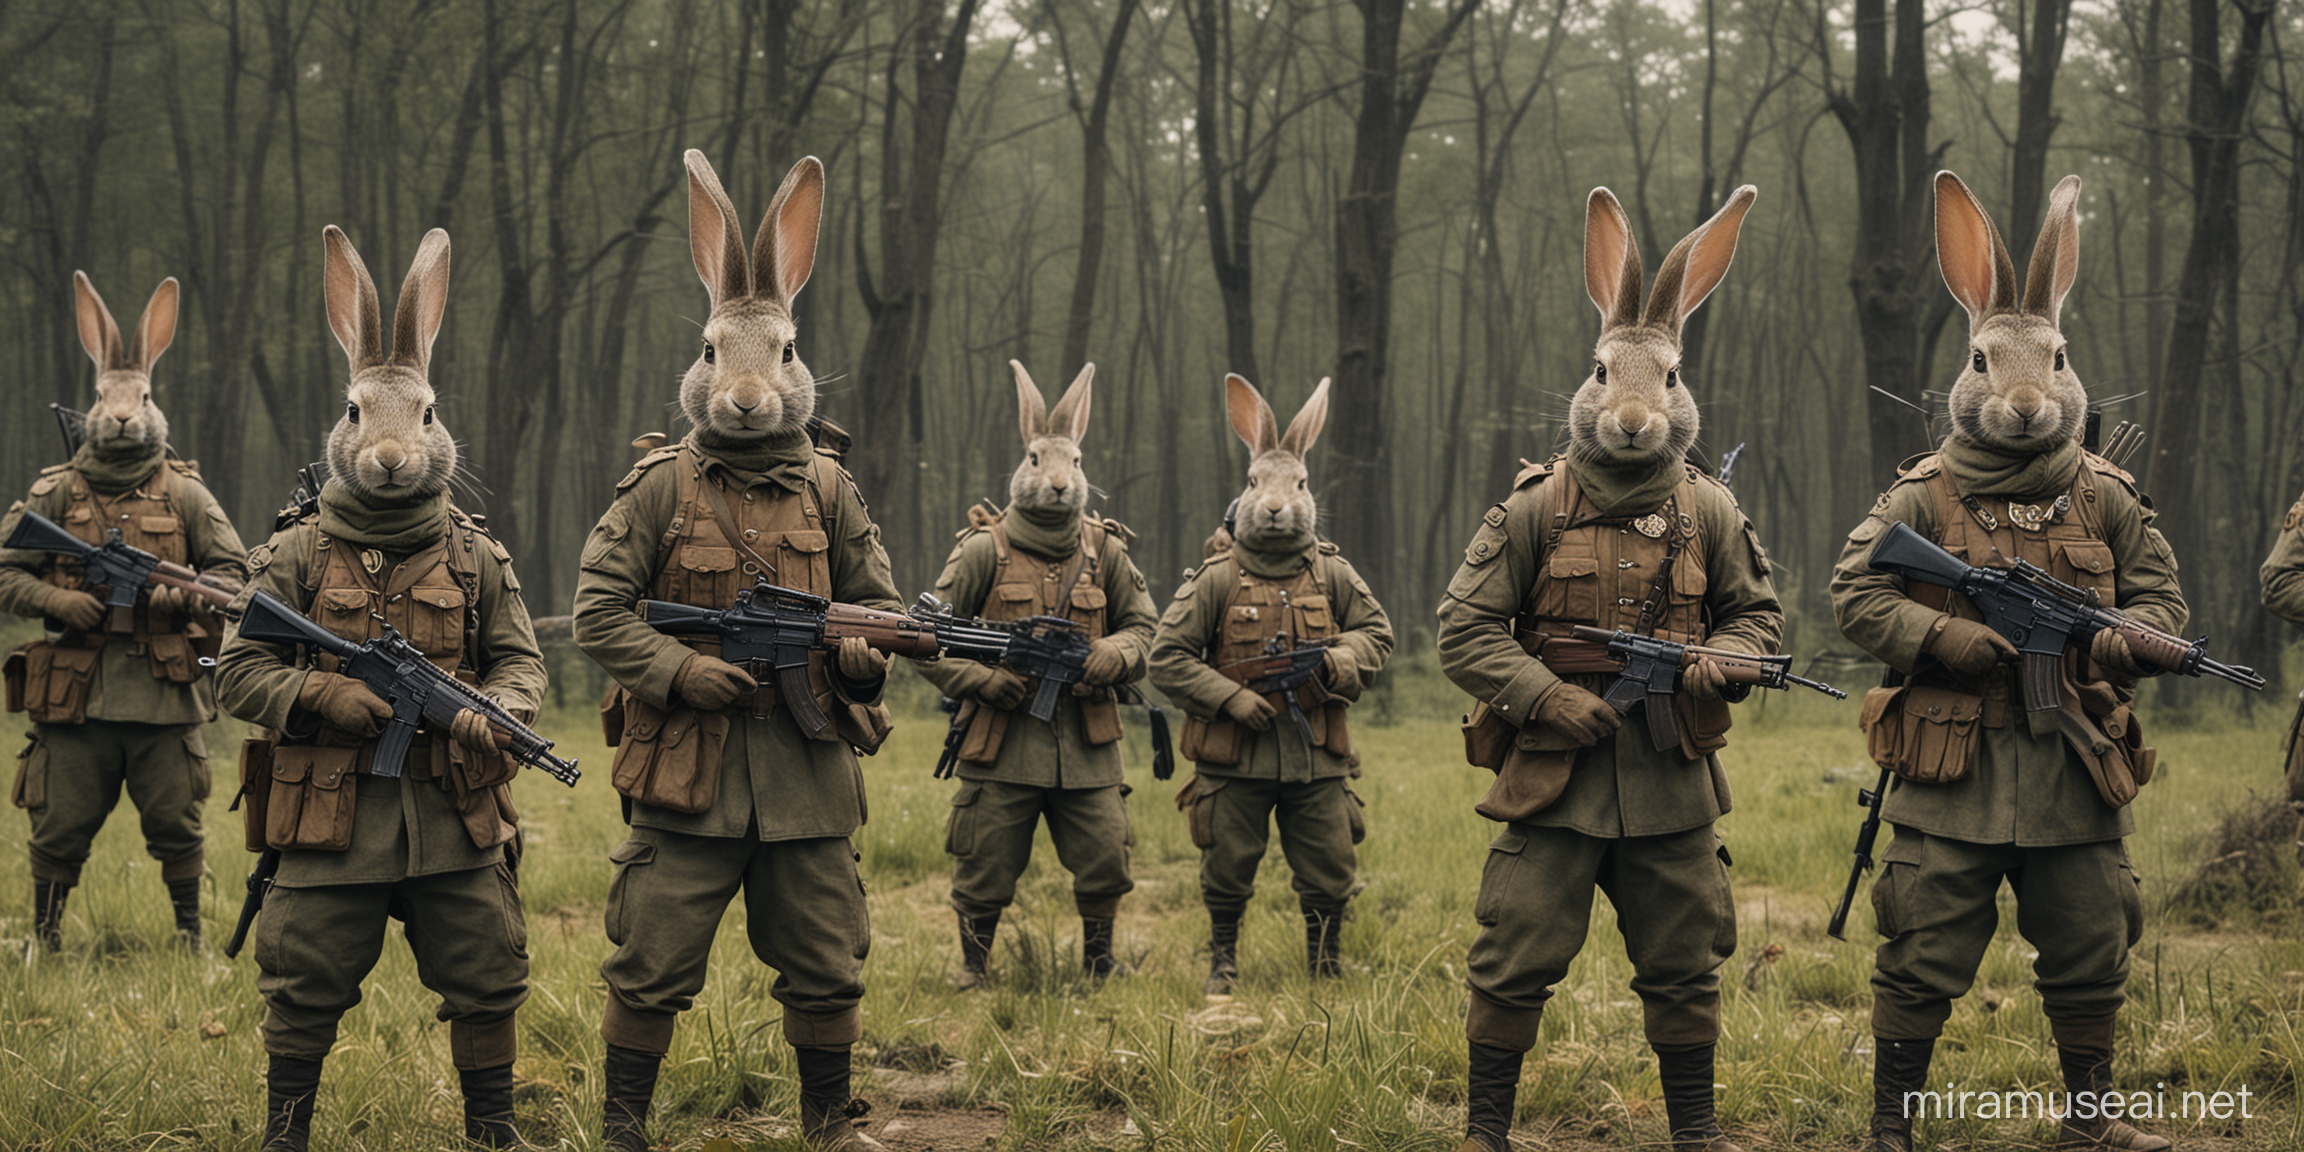 Rabbit Soldiers Marching through Enchanted Forest